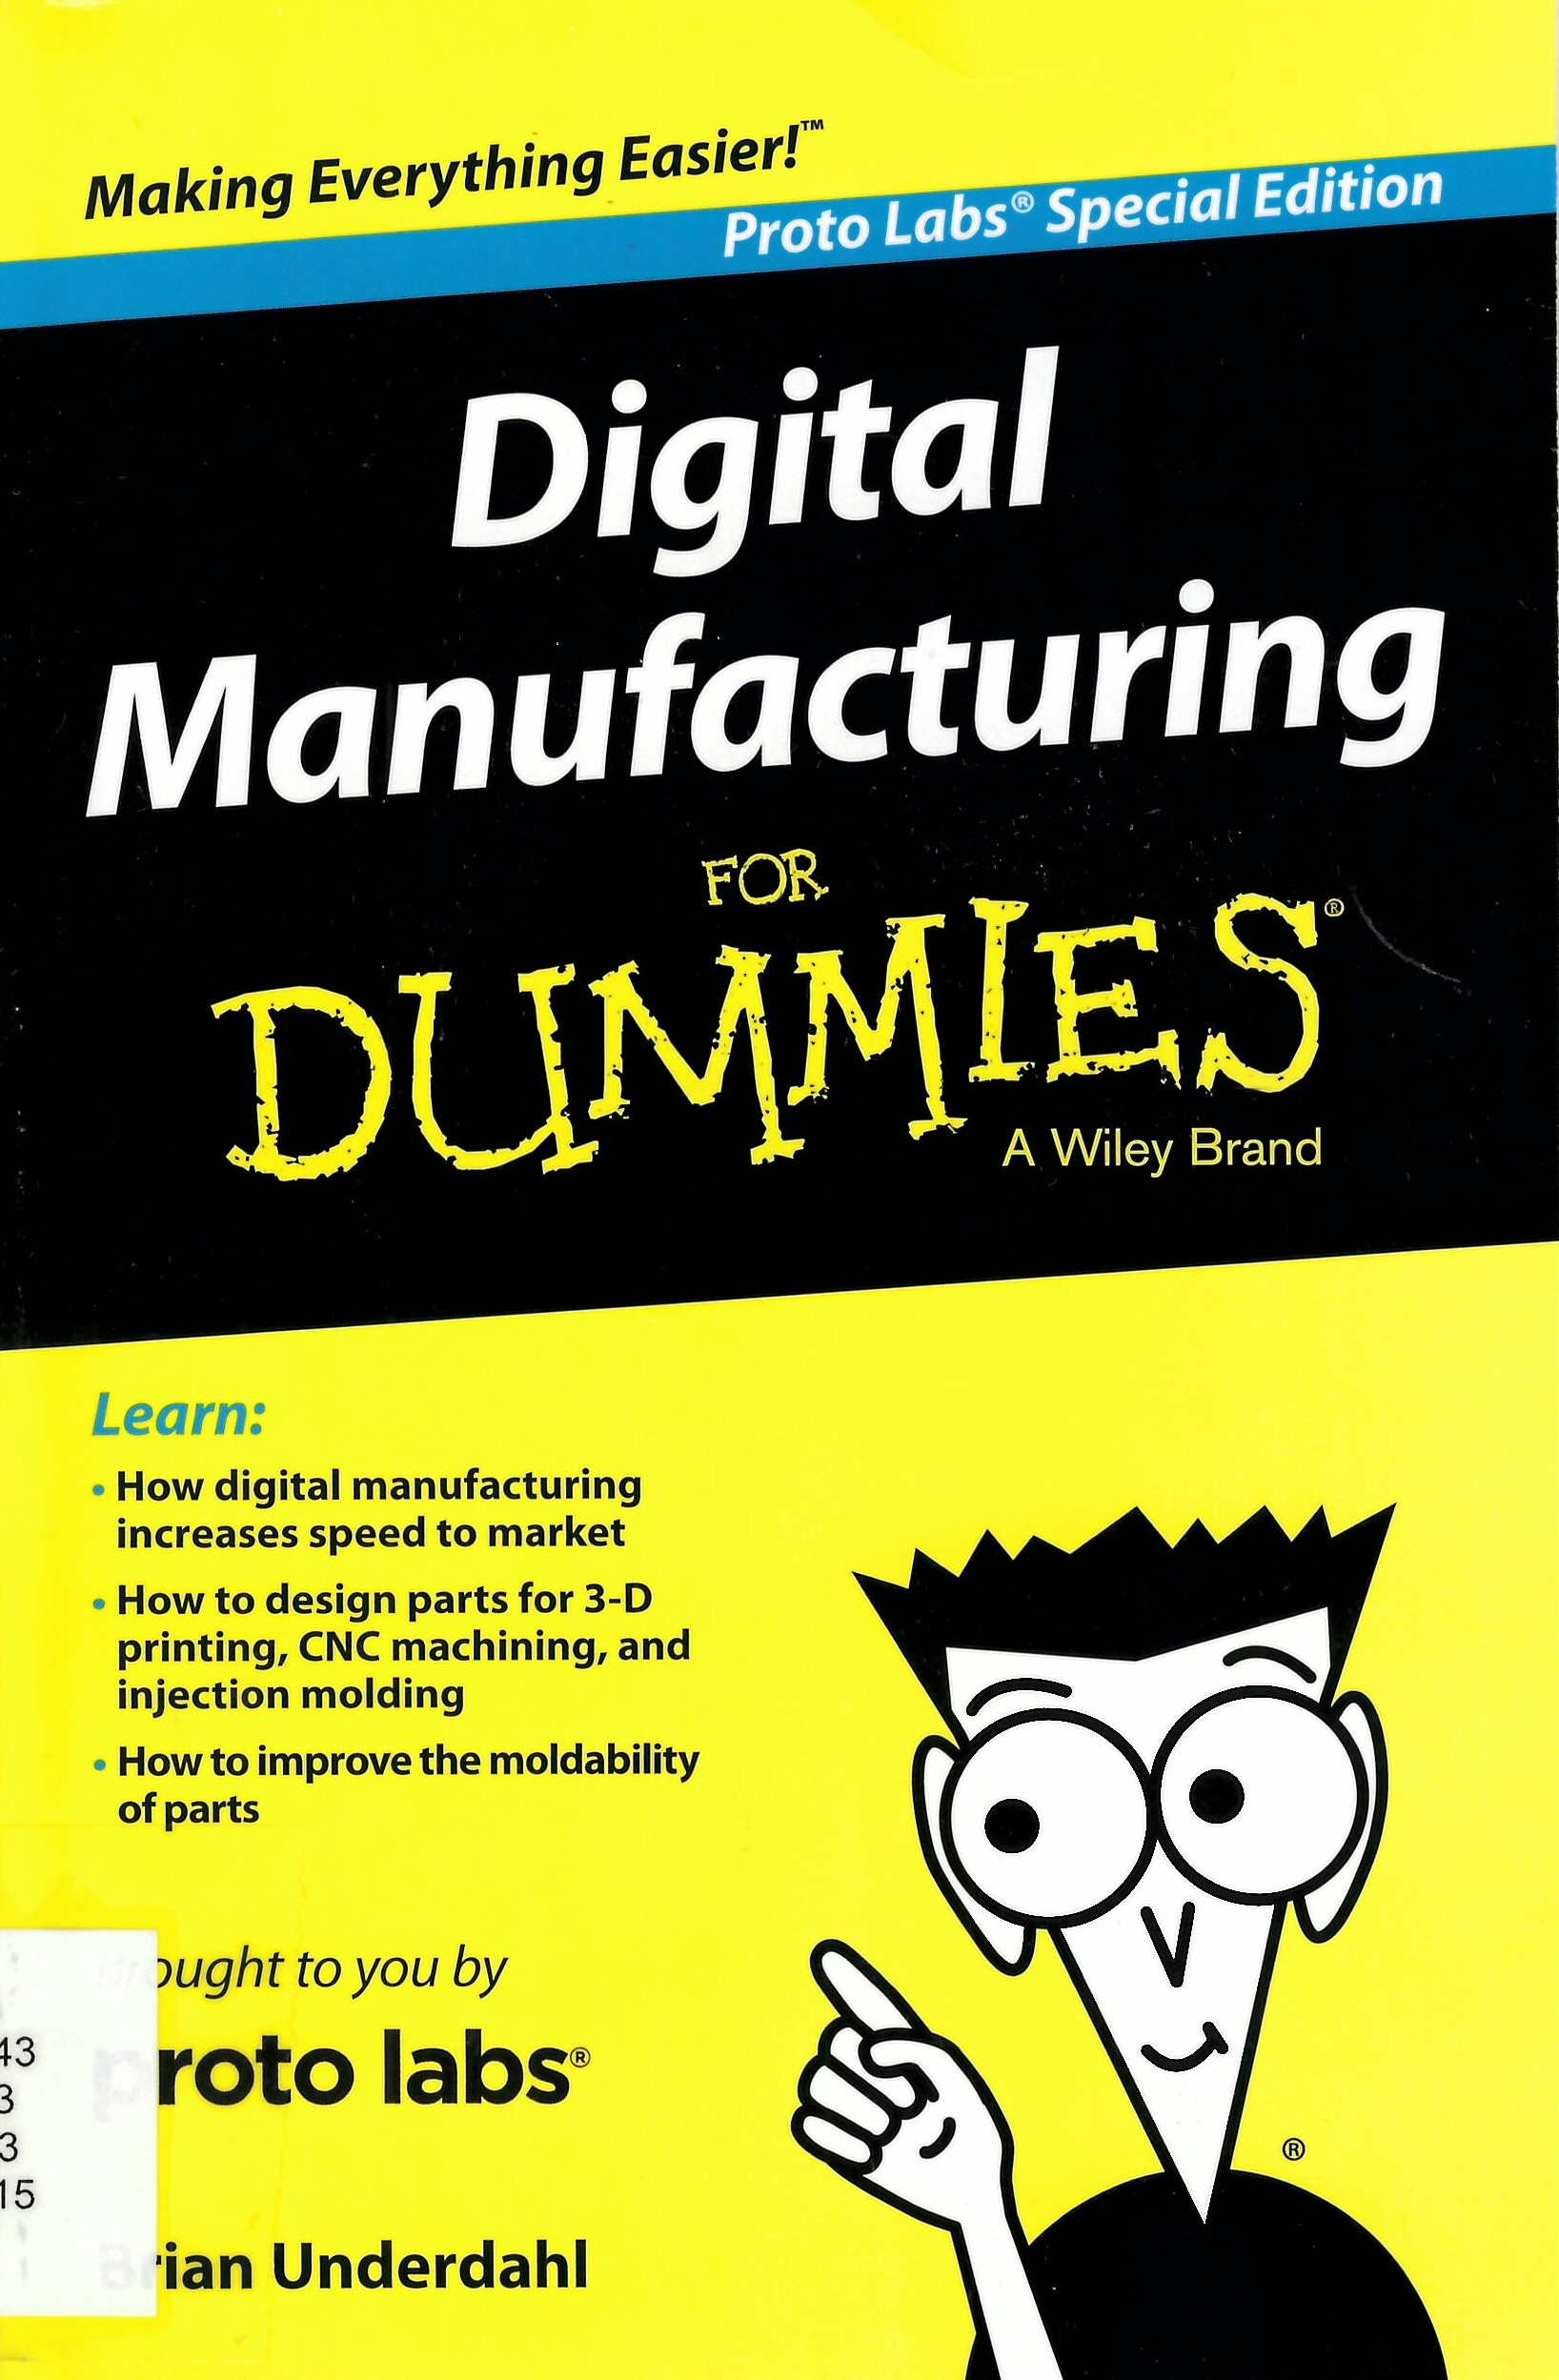 Digital manufacturing for dummies